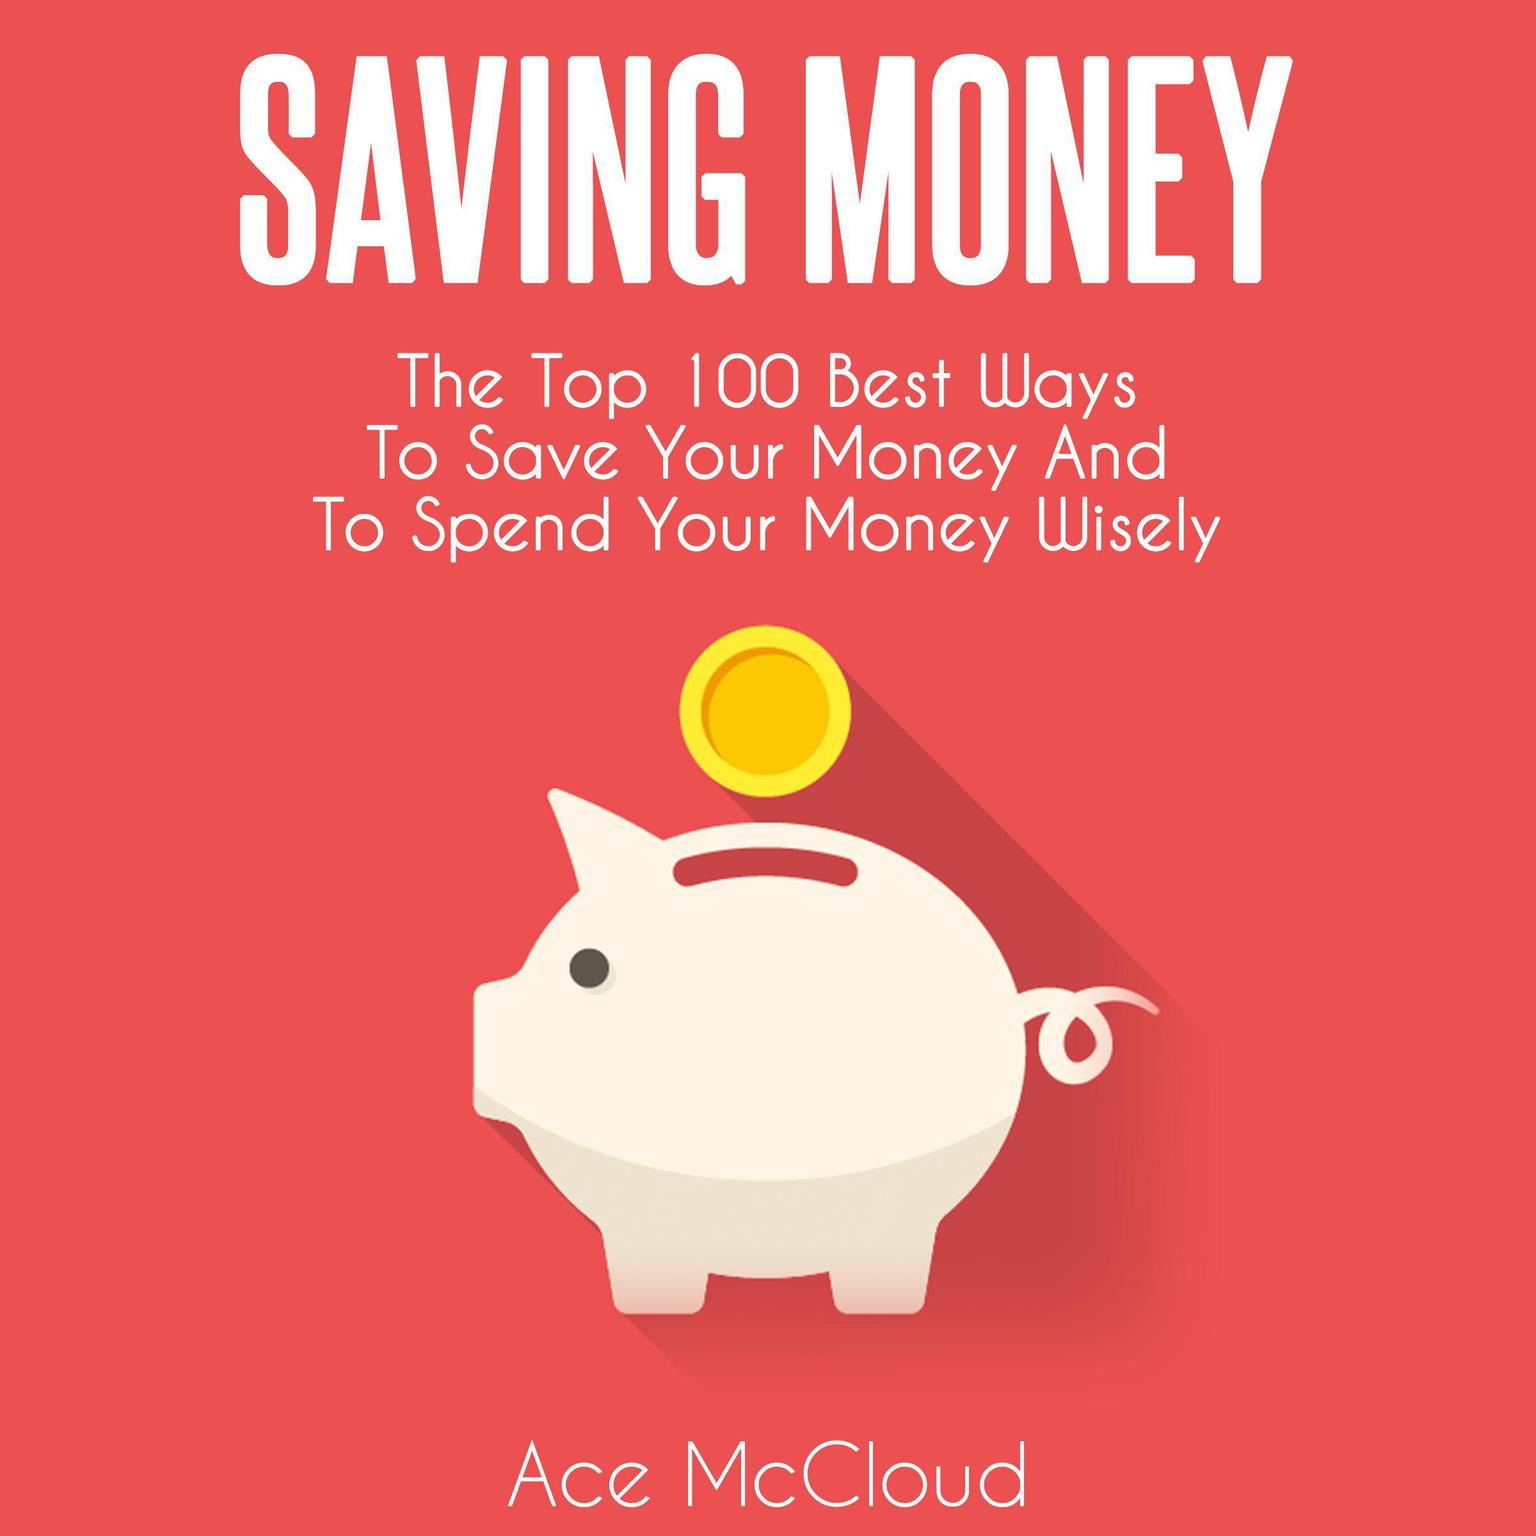 Saving Money: The Top 100 Best Ways To Save Your Money And To Spend Your Money Wisely Audiobook, by Ace McCloud